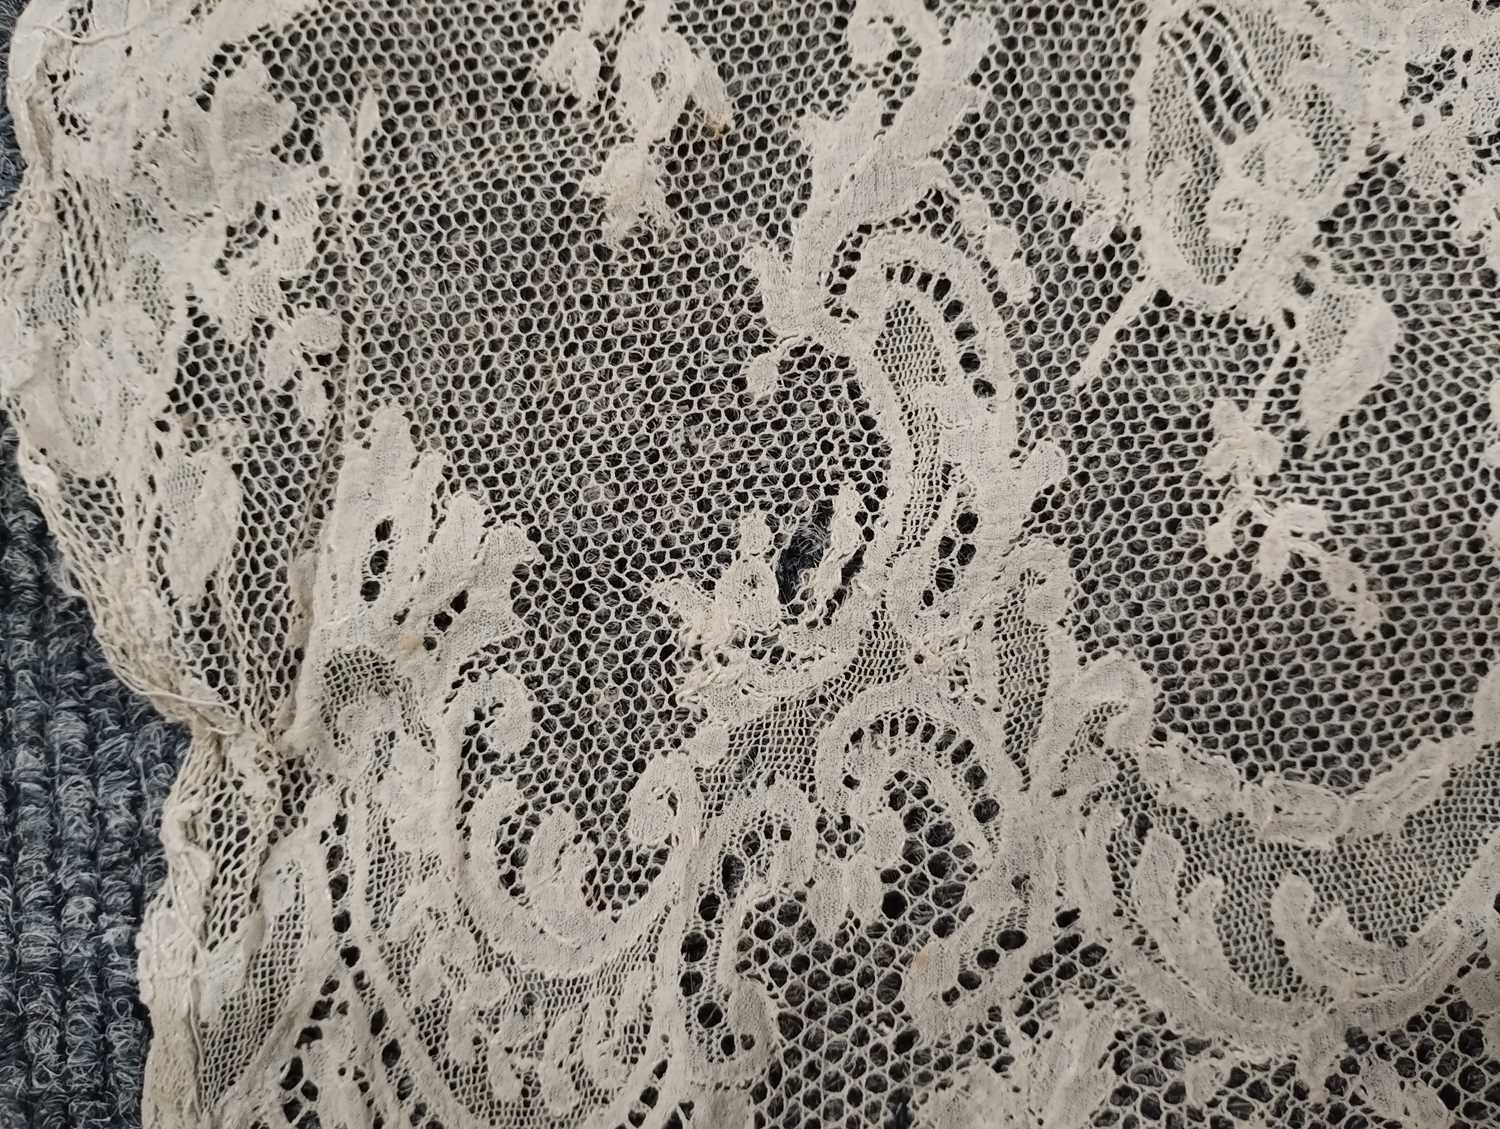 Early 20th Century Lace comprising a flounce with appliquéd flower heads and motifs within a - Image 10 of 32